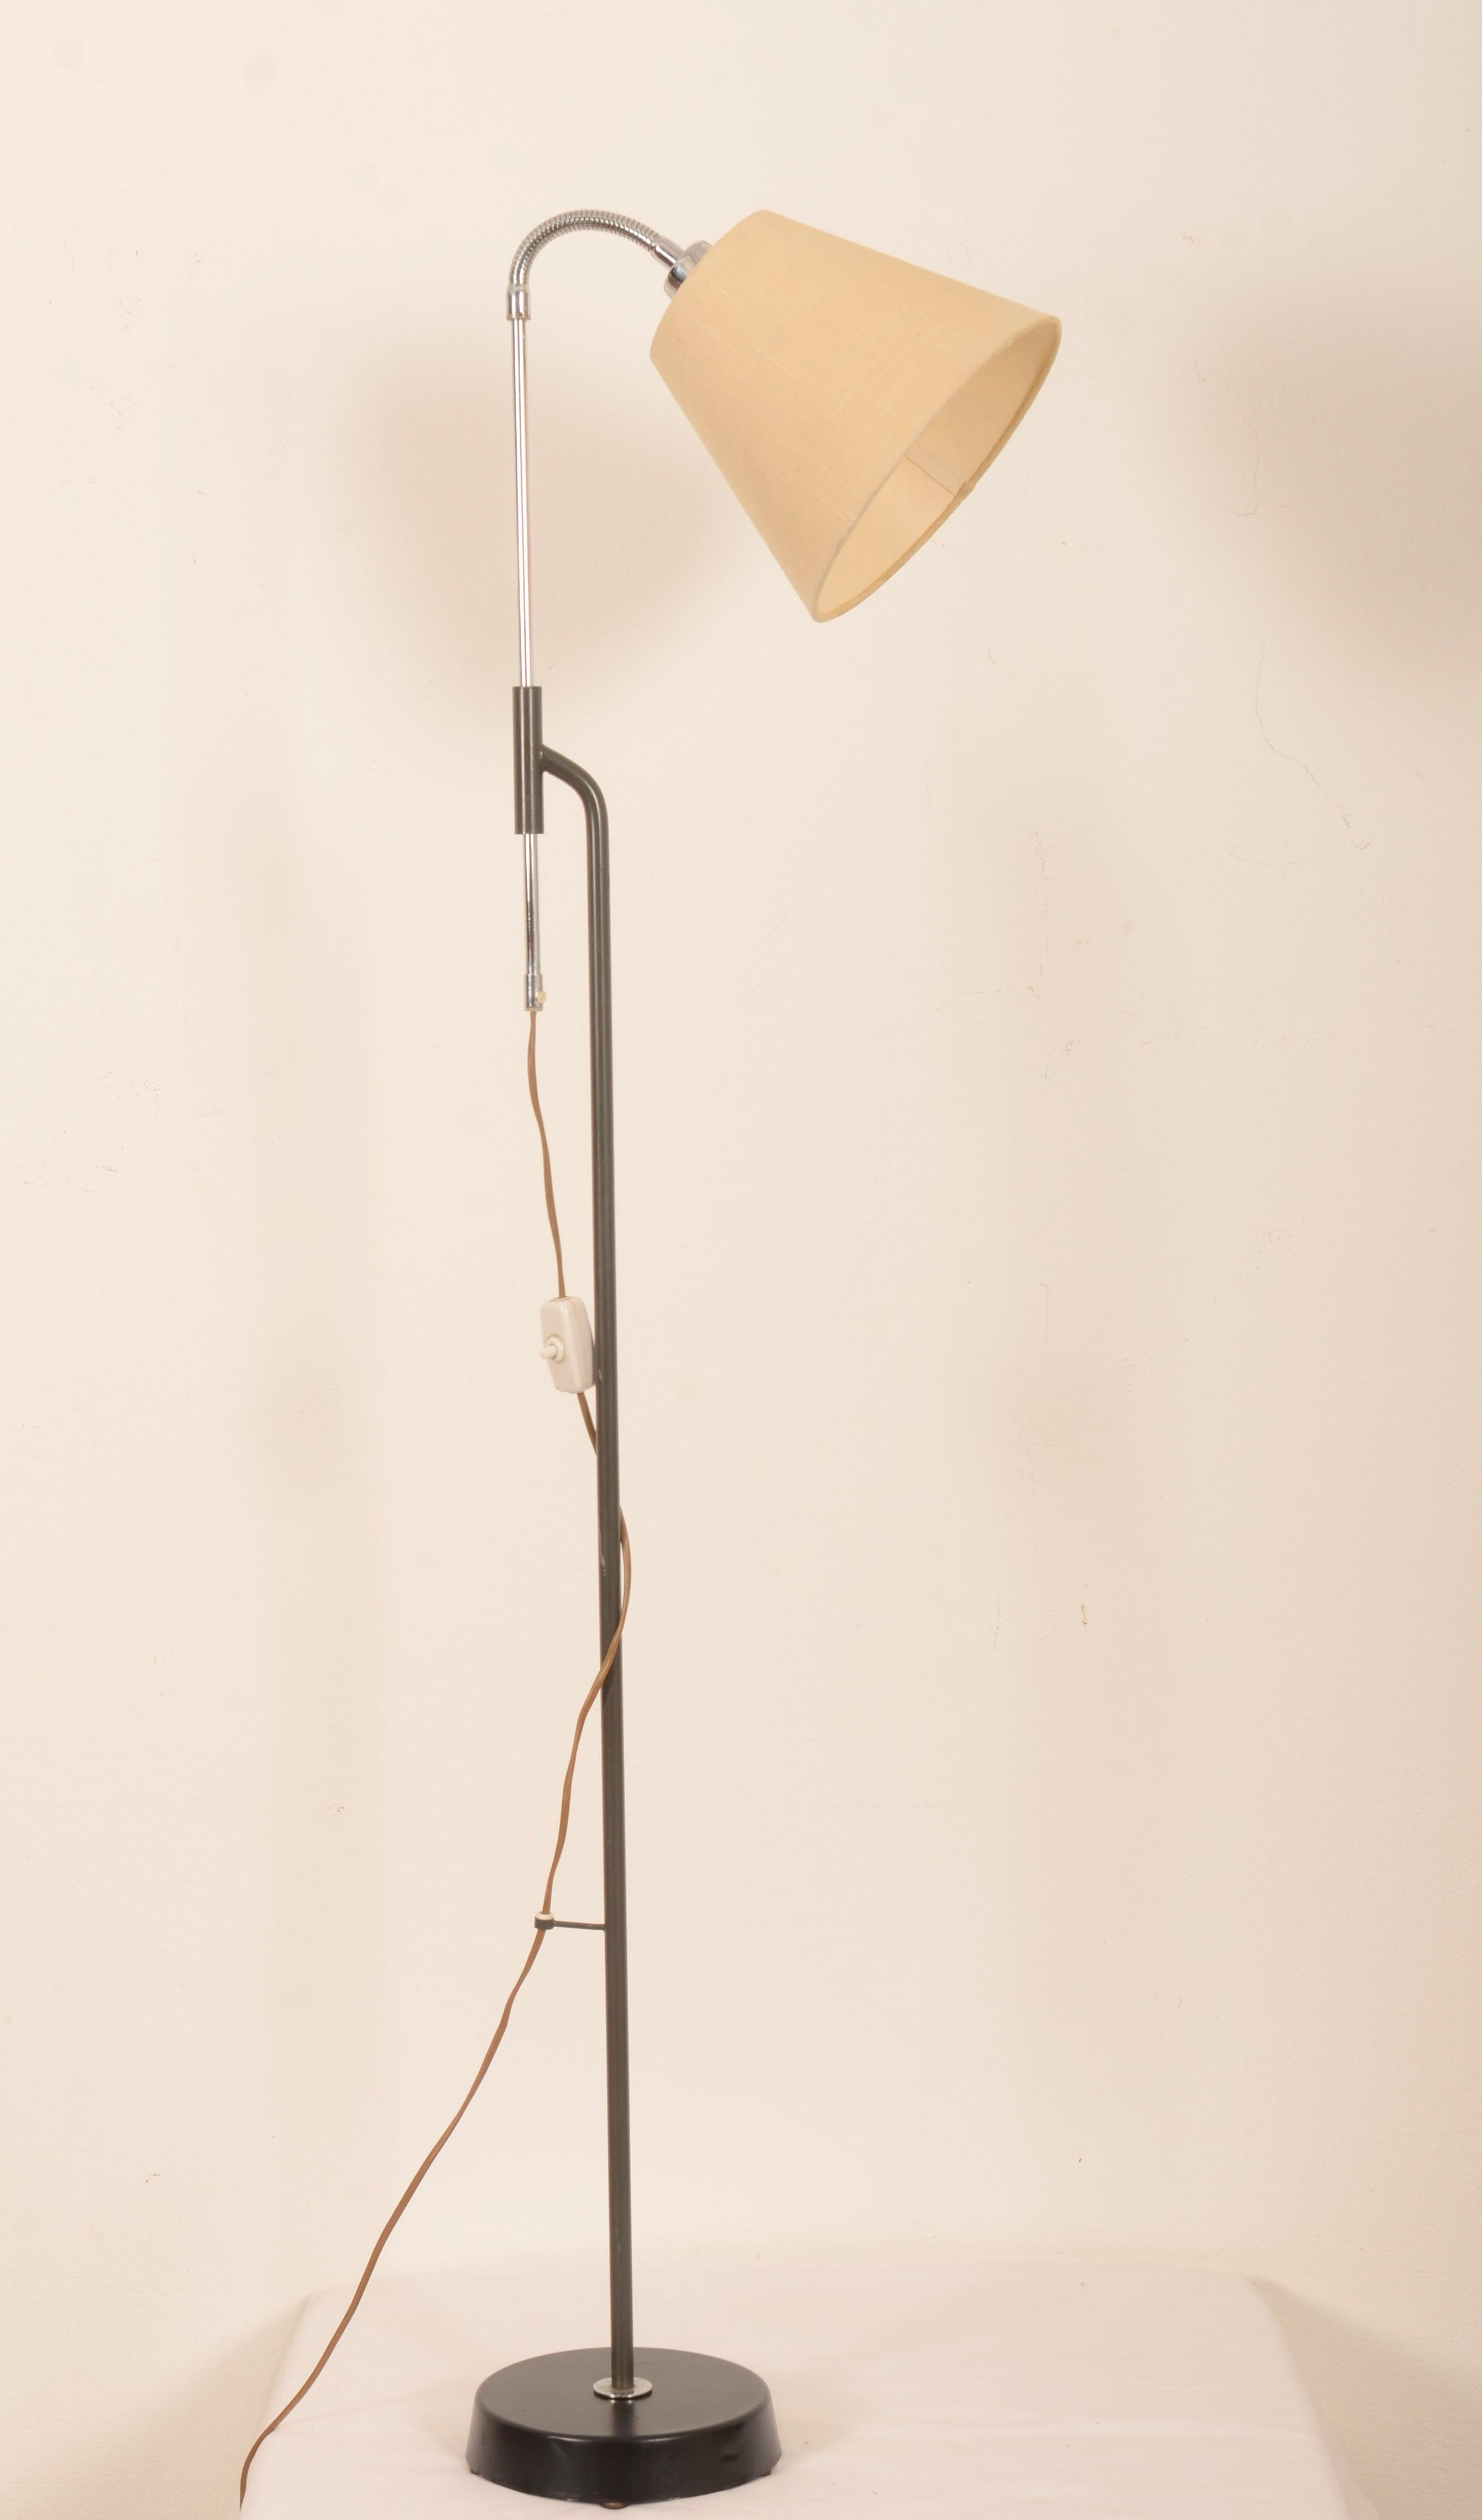 Cast iron base, arm with goose neck fitted with E27 bakelite sockets and cream lamp shades. Designed in Sweden in the 1960s.